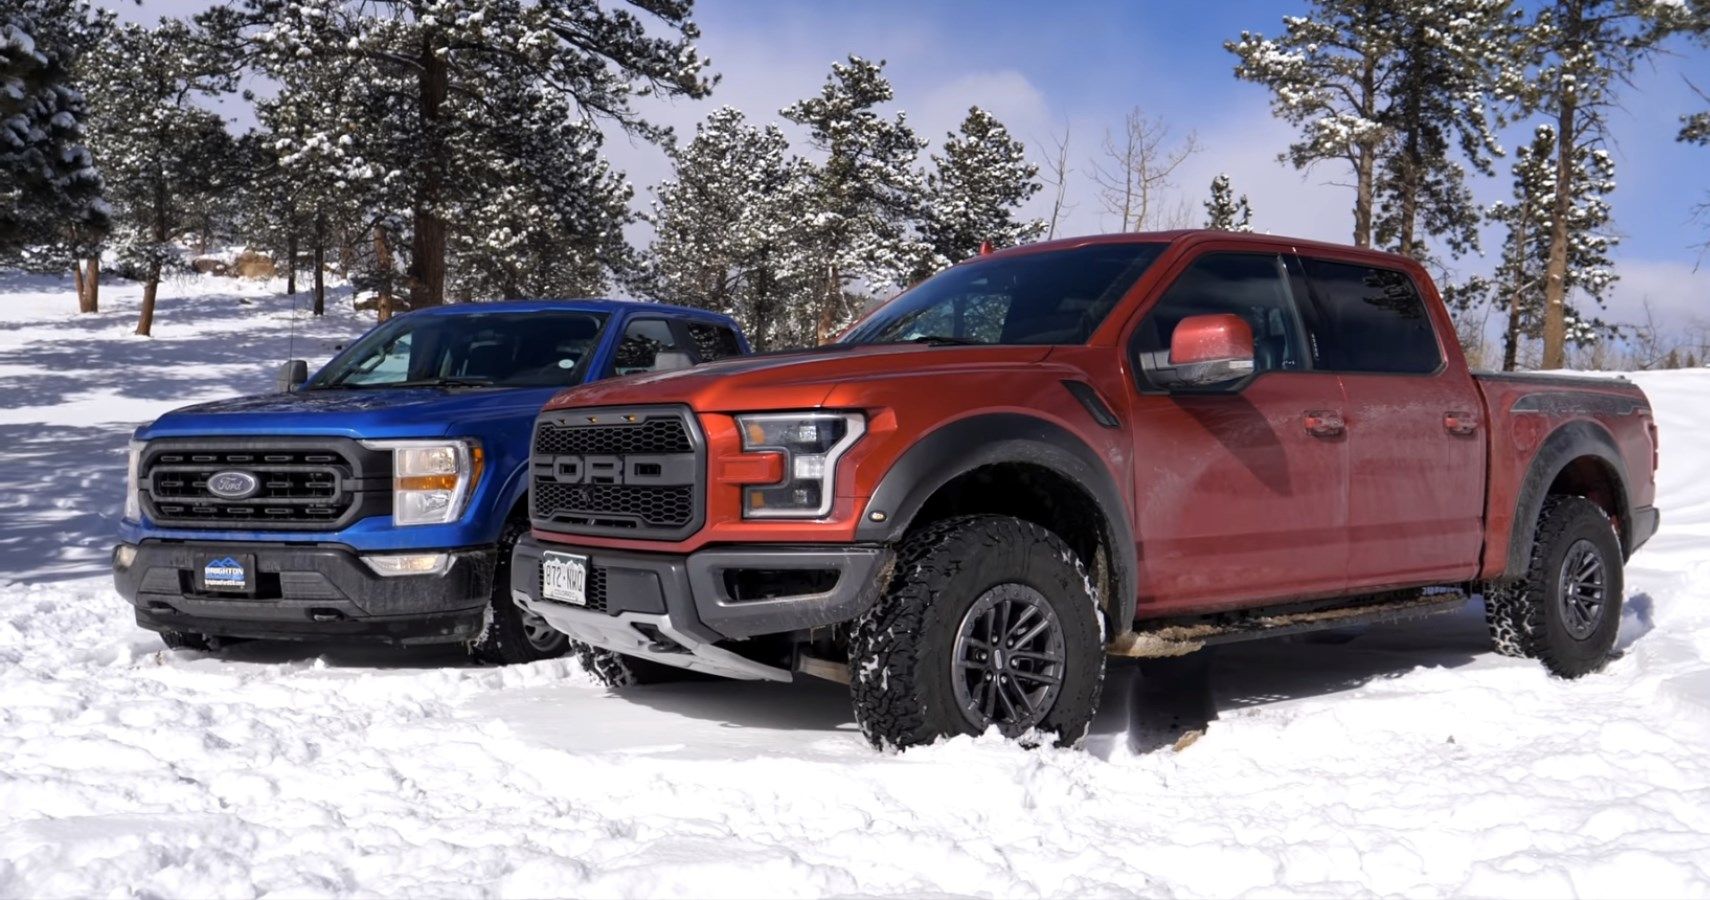 2020 Raptor Vs 2021 XL PowerBoost FX4: Which Ford Pickup Is Better In Snow?